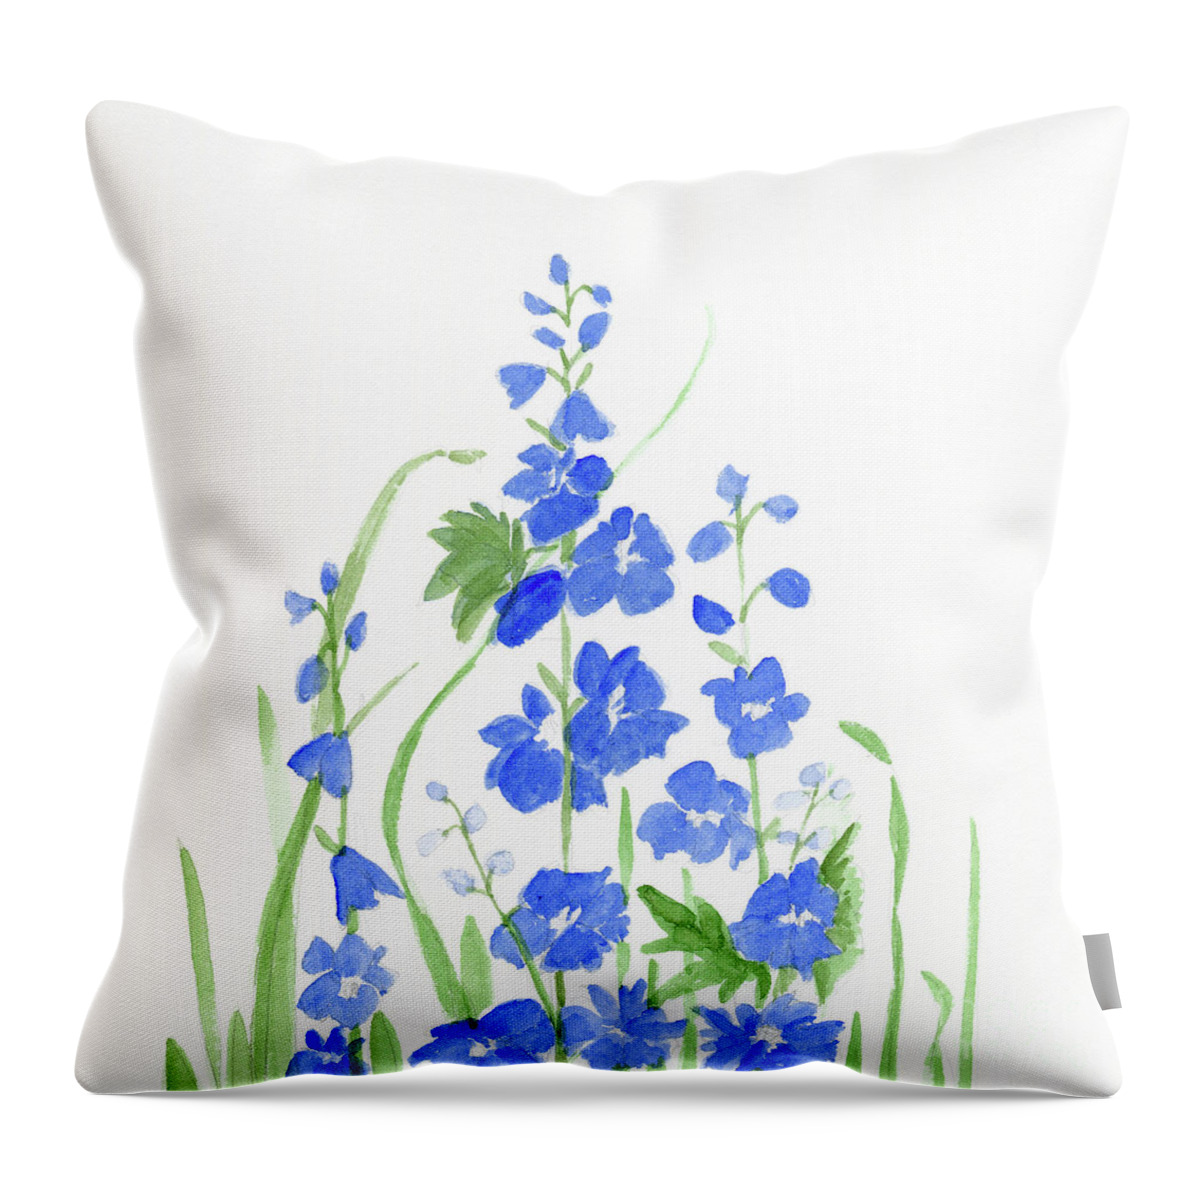 Larkspur Throw Pillow featuring the painting Blue Larkspur by Laurie Rohner